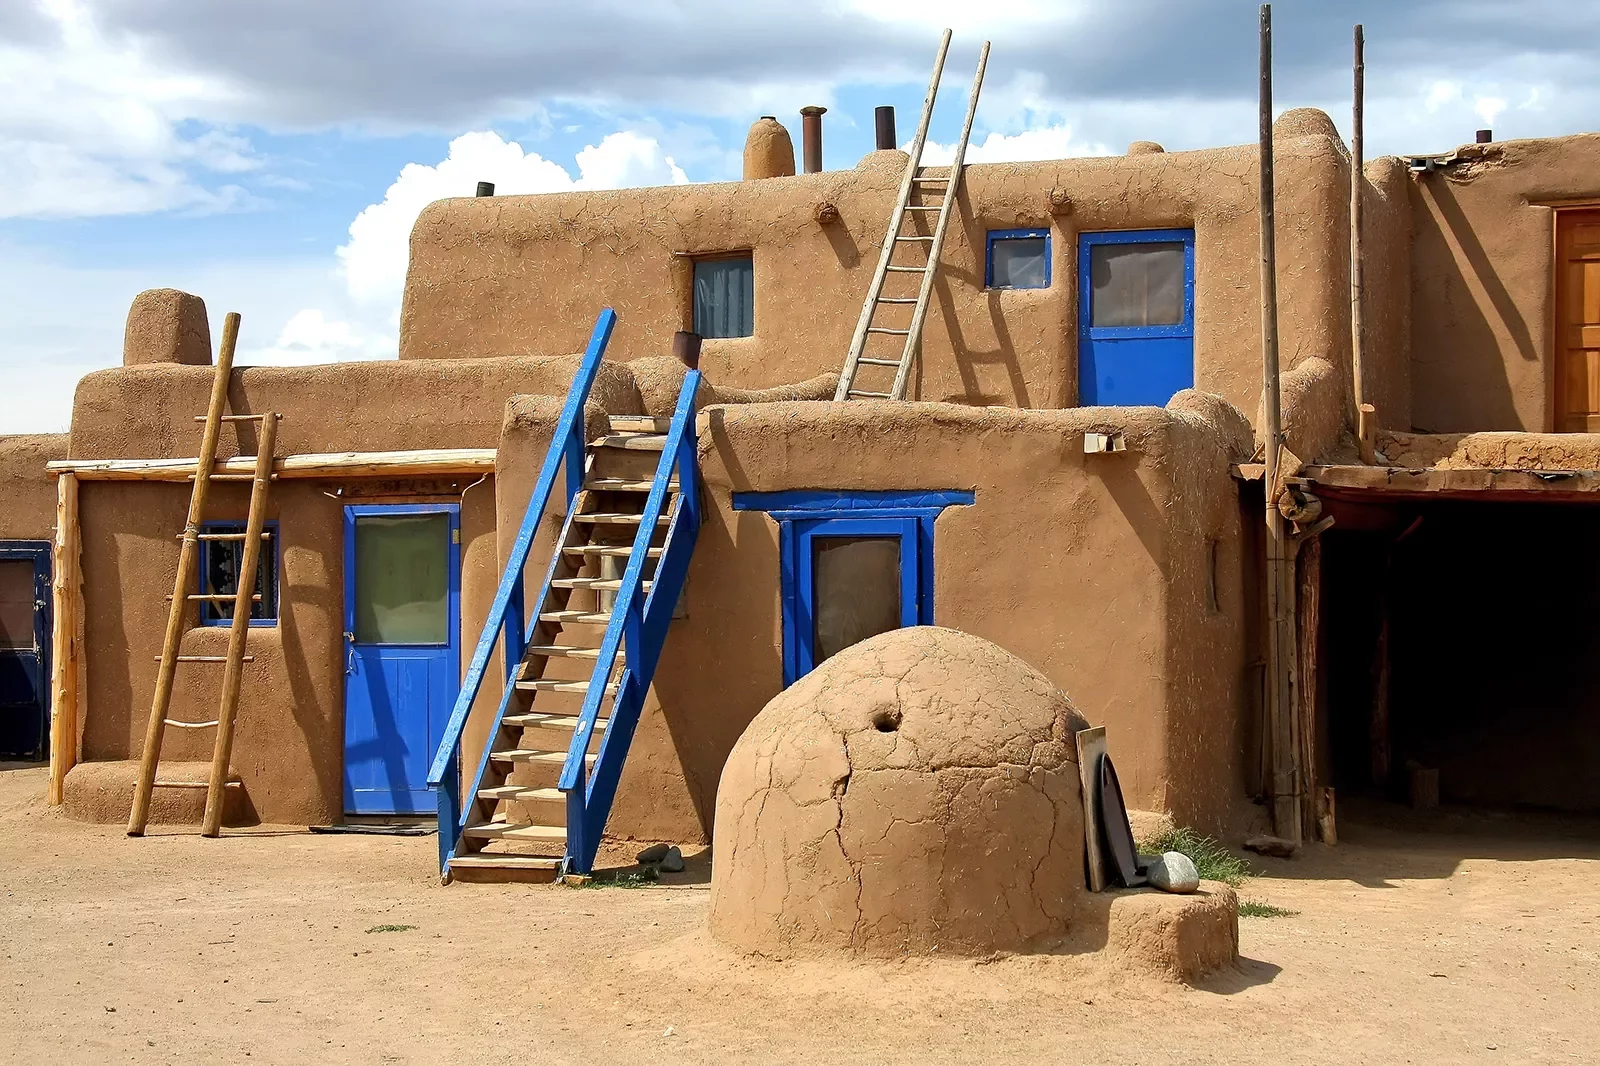 Orange clay structure with blue doors